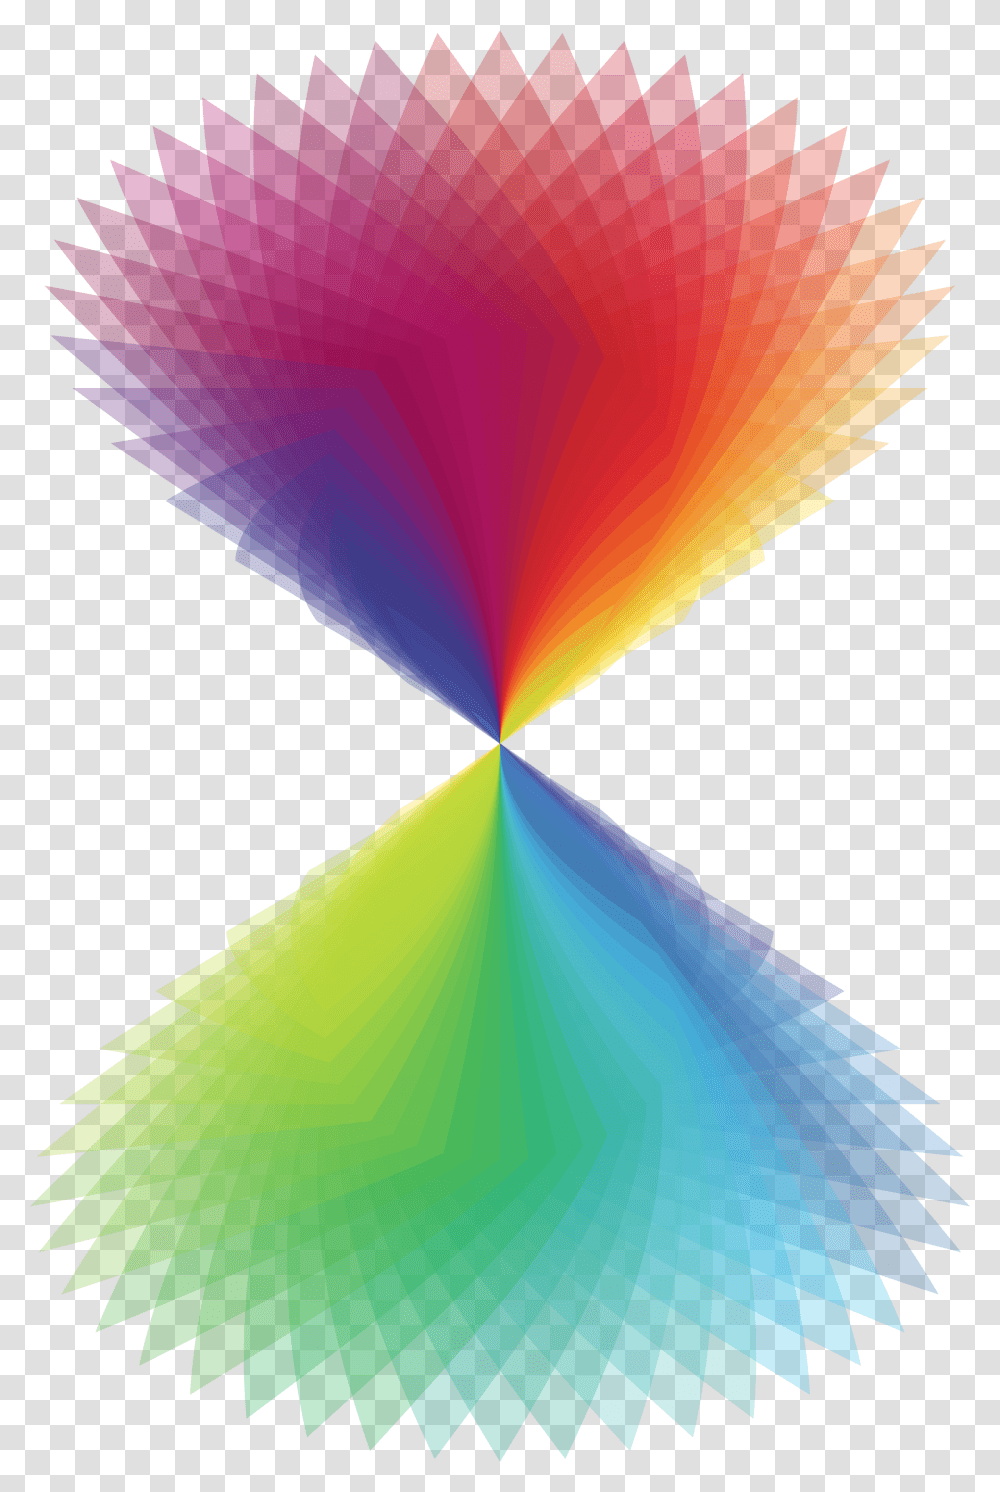 Rainbow Hourglass Clip Arts Rainbow Hourglass, Pattern, Triangle, Ornament Transparent Png